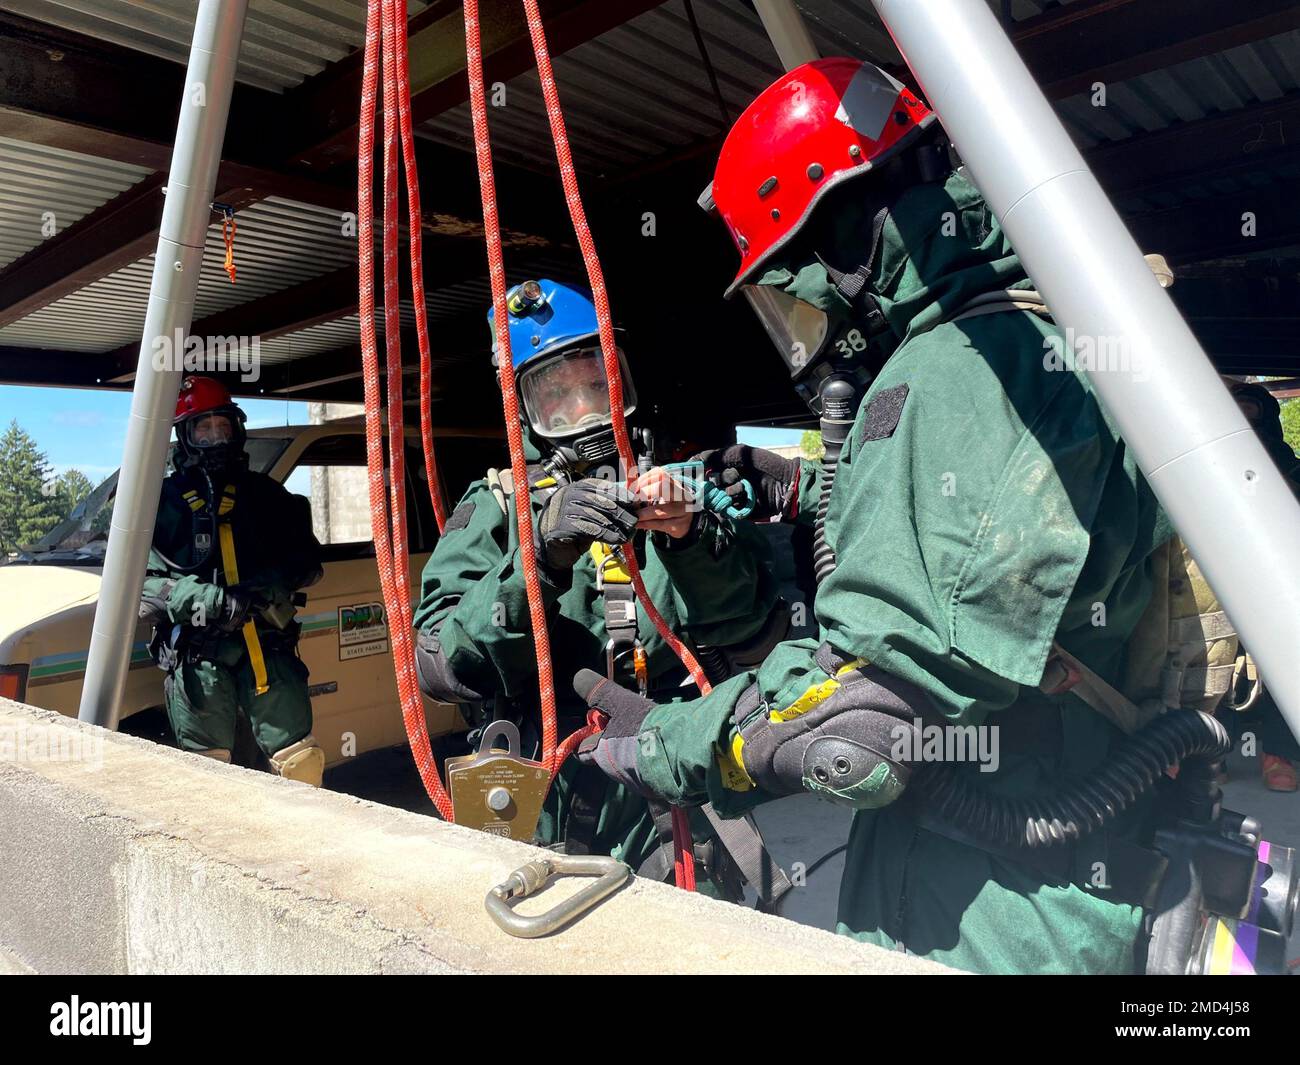 Members of the Ohio National Guard Homeland Response Force’s Chemical, Biological, Radiological, Nuclear Task Force conduct ropes rescue operations using an Arizona Vortex artificial high directional, a rope line rescue device capable of bearing a load of more than 600 pounds, during a July 2022 training exercise at Muscatatuck Urban Training Center in Butlerville, Ind. Members of the CBRN-TF’s medical element, in conjunction with the search and extraction team, are trained to conduct ropes rescues in full hazmat gear if casualties are trapped in hard-to-reach places, need lifesaving treatment Stock Photo